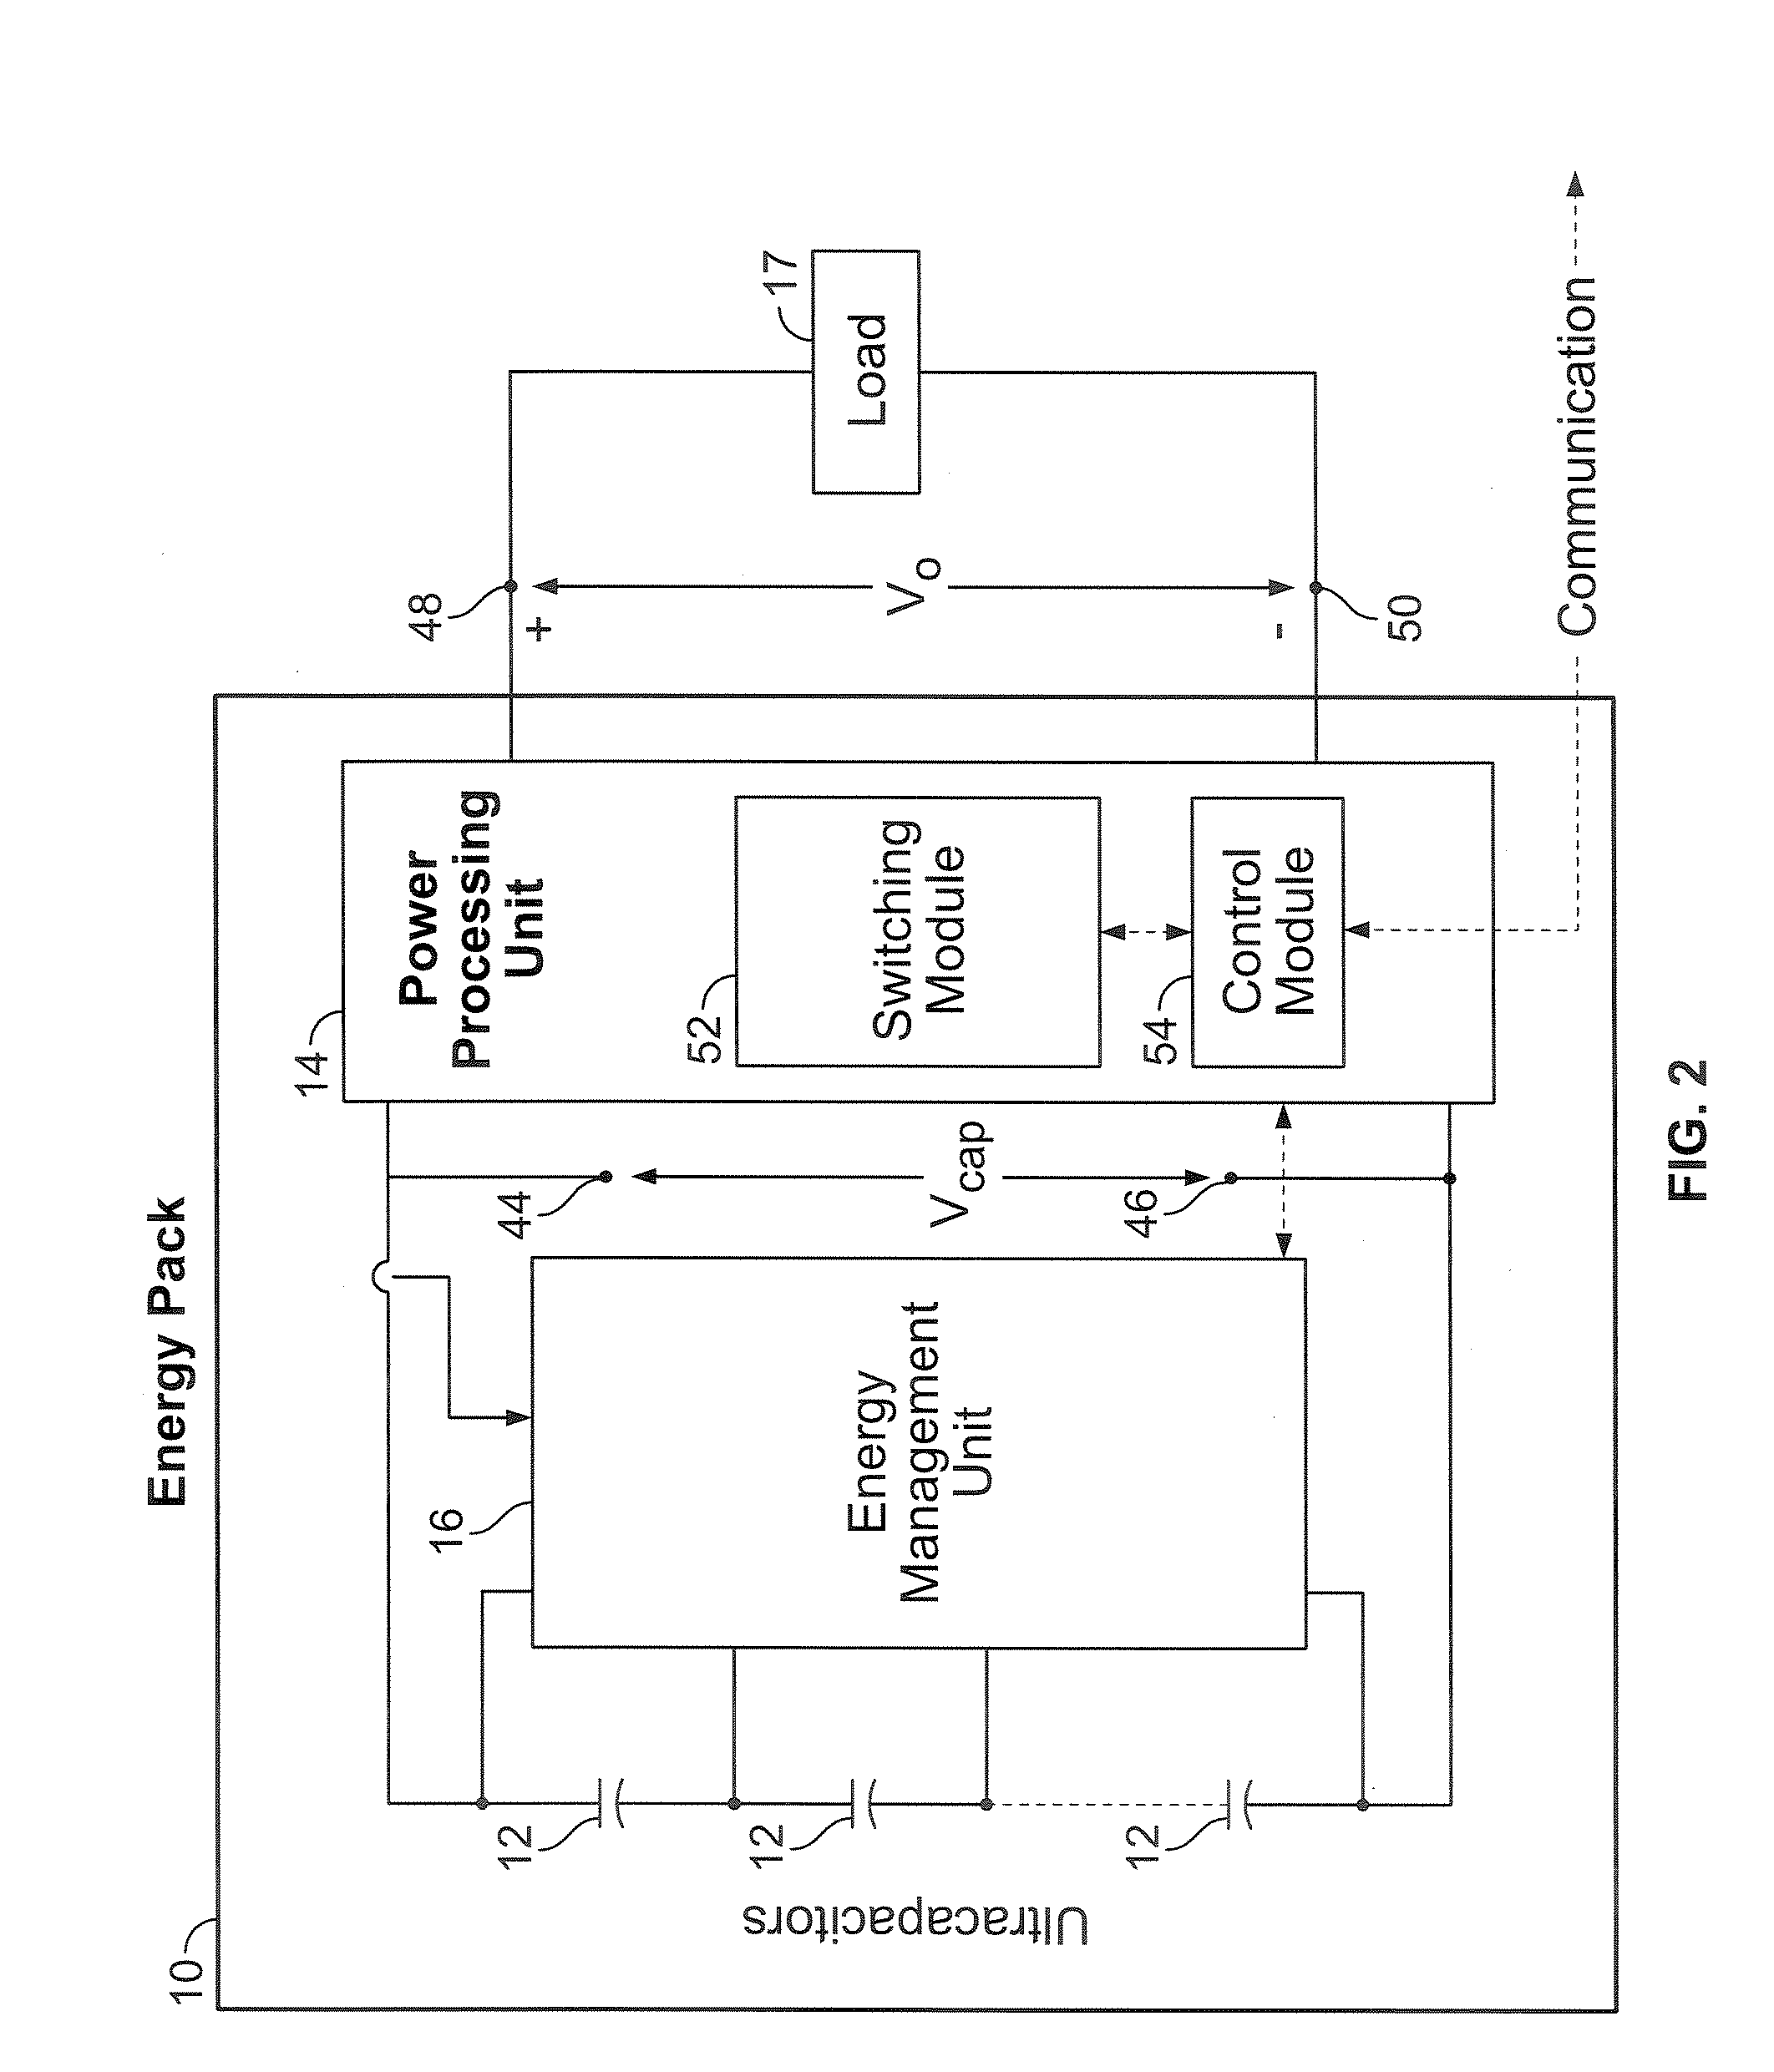 Power processing unit and related method for controlling voltage fluctuations across an energy storage device